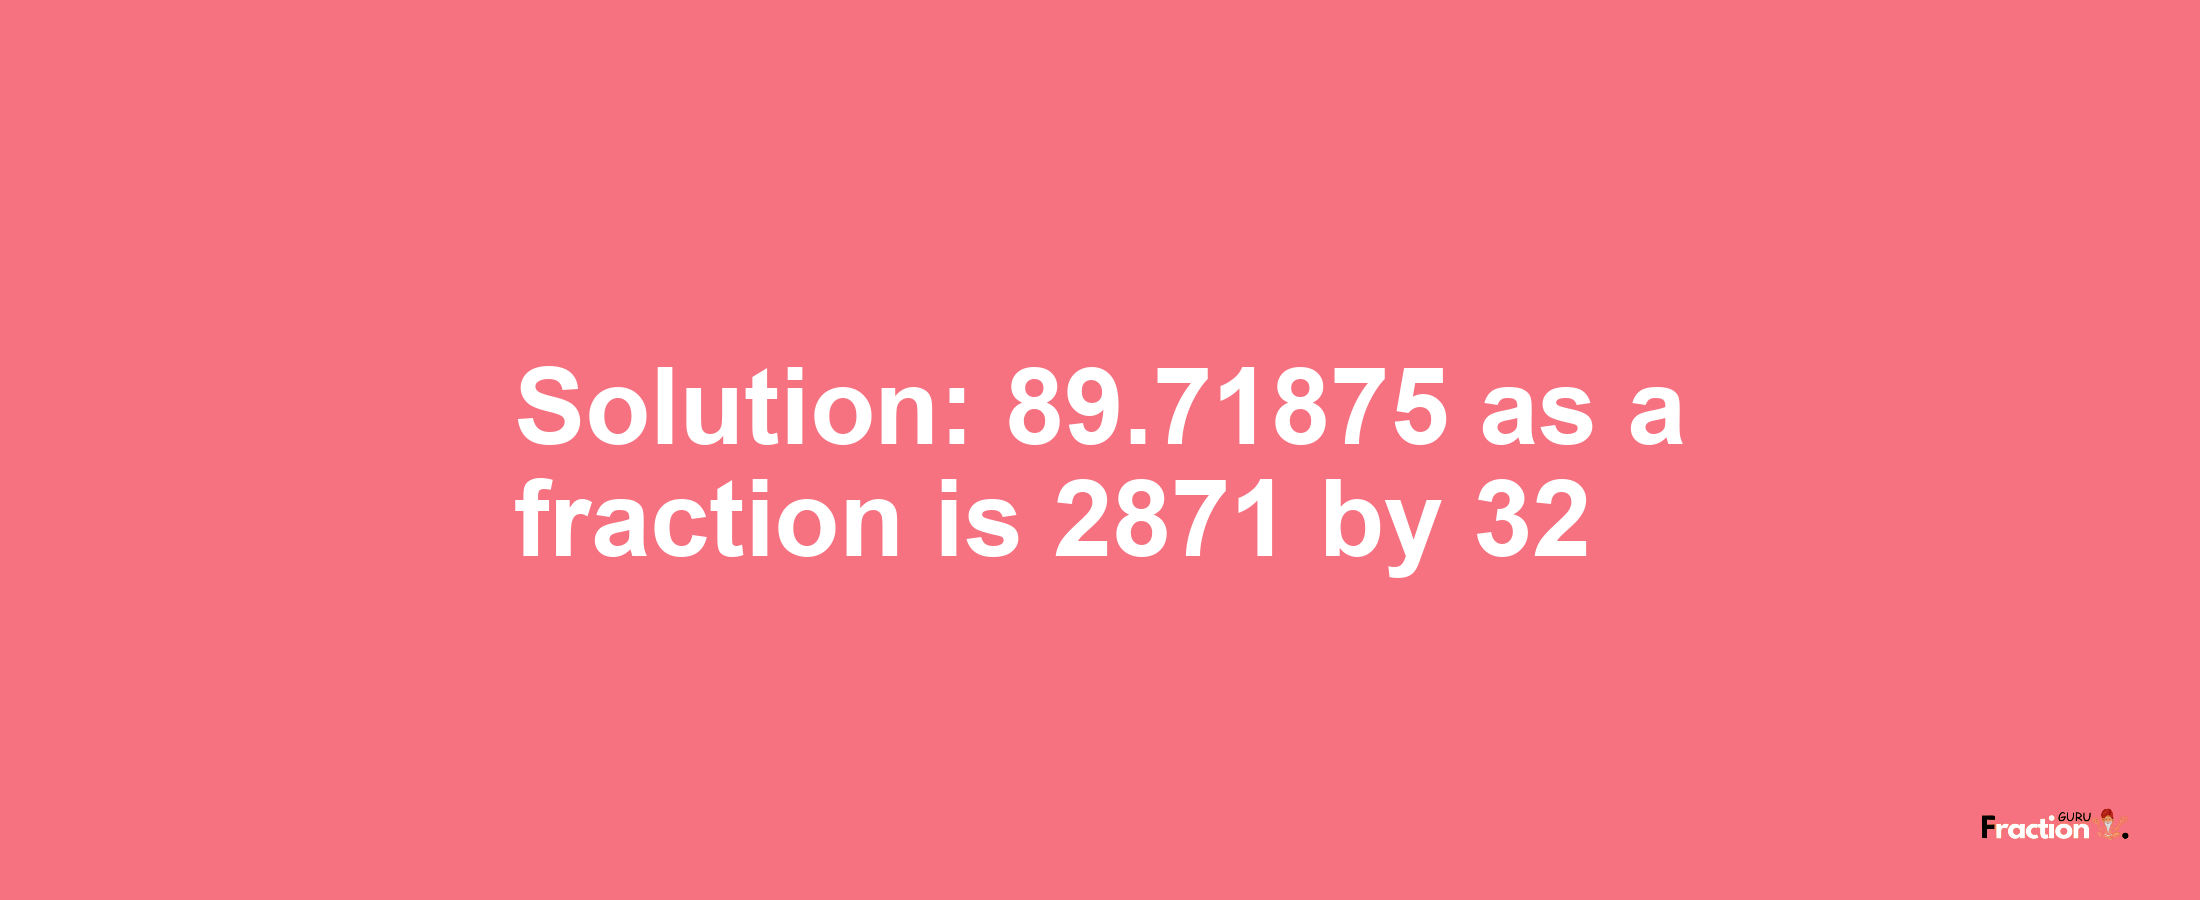 Solution:89.71875 as a fraction is 2871/32